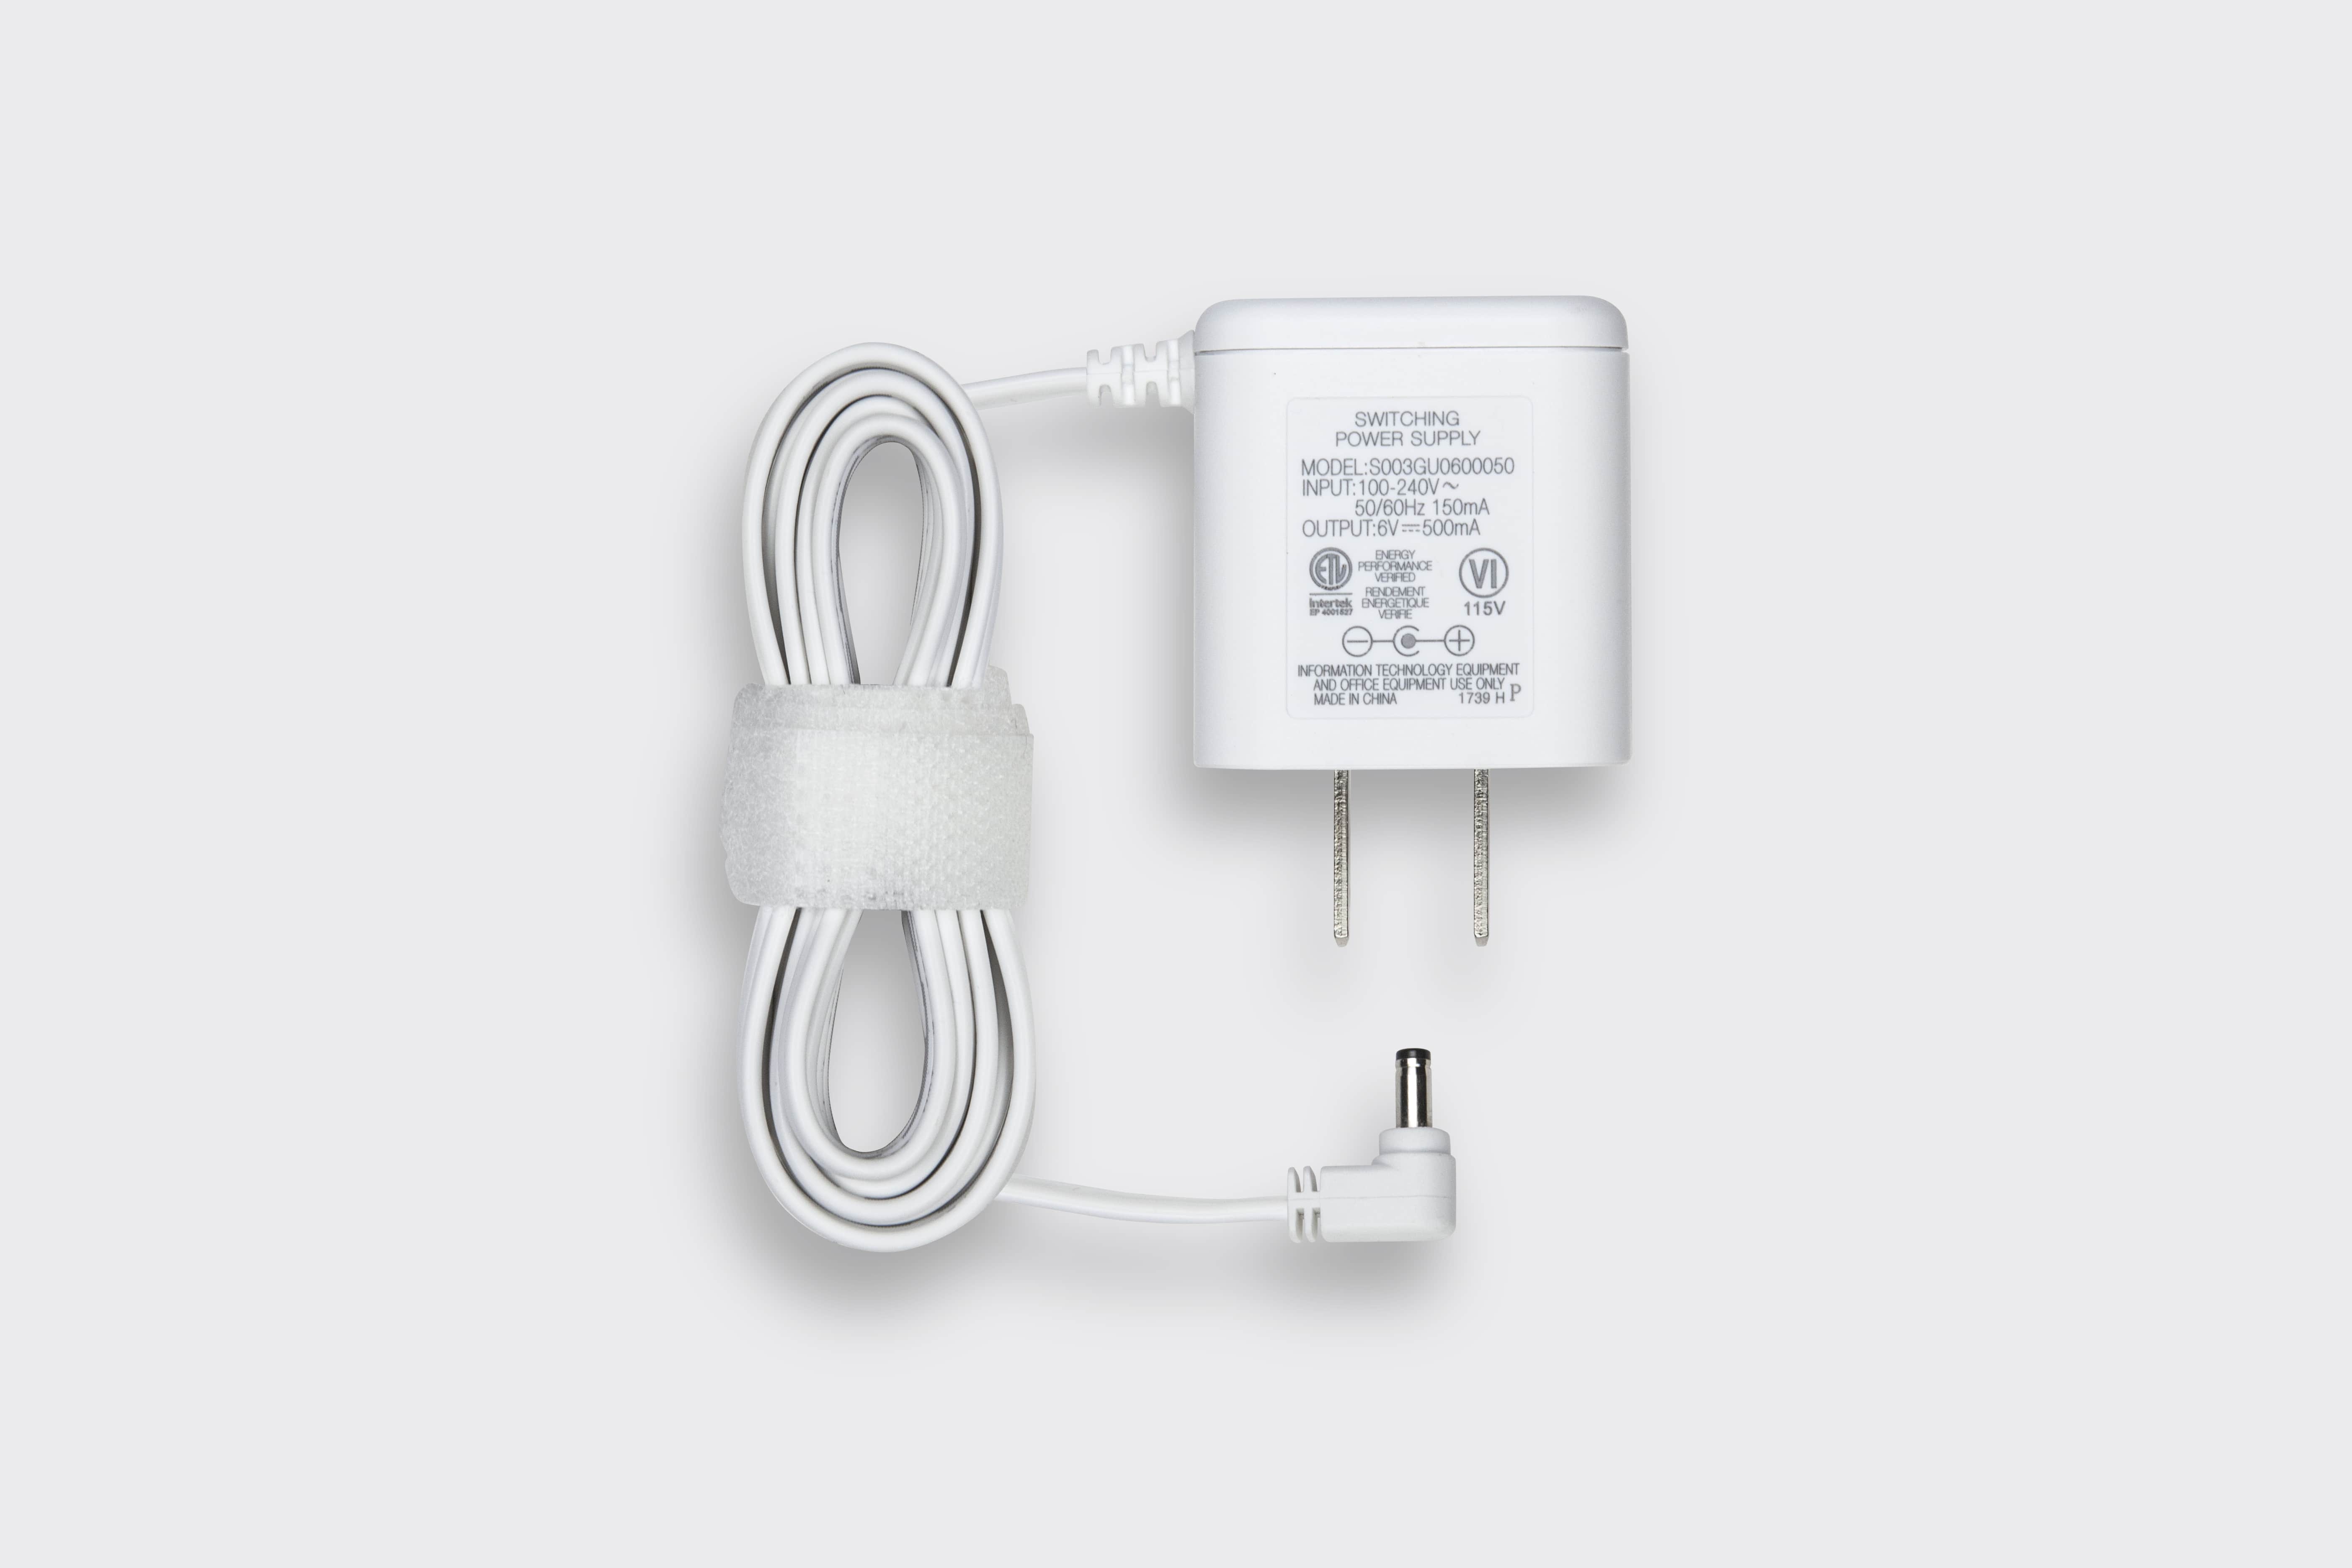 90cm USB White Cable for Miniland Baby 89166 2.4" Baby Monitor Parent Unit 